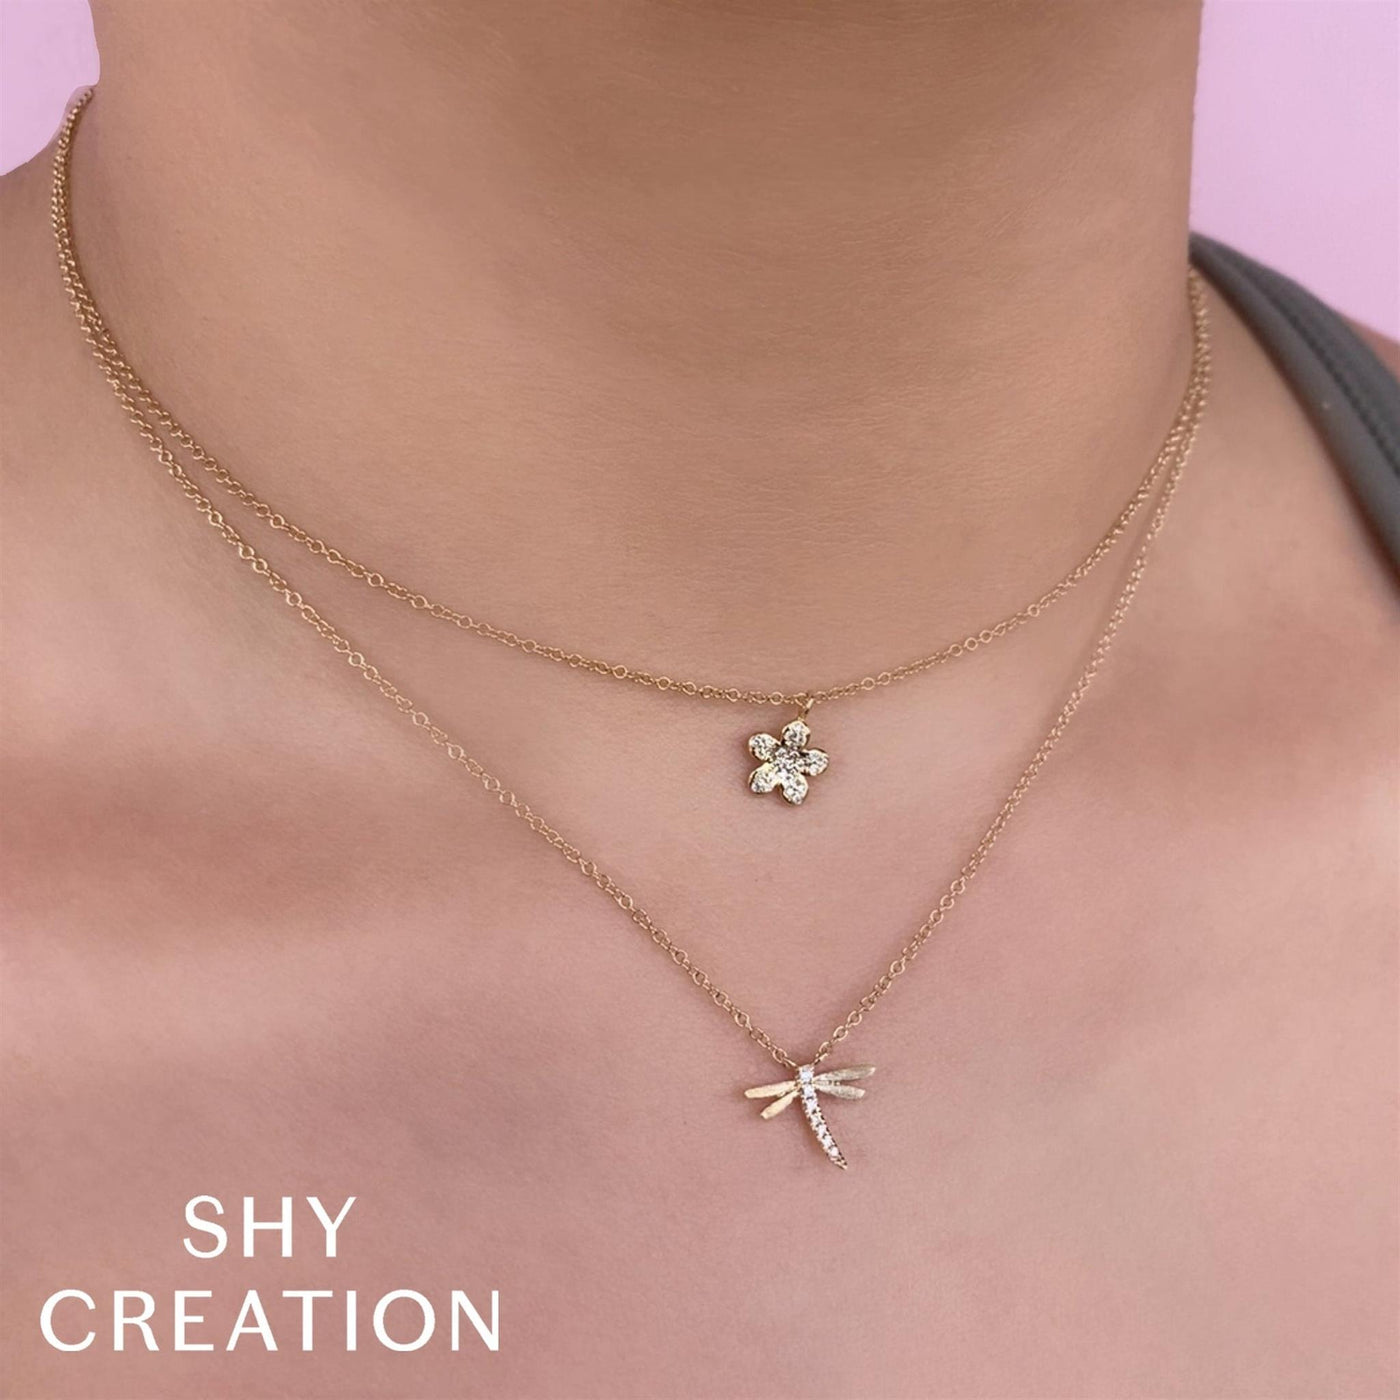 Shy Creation 14K Yellow Gold 0.03ctw Dragonfly Style Pendant